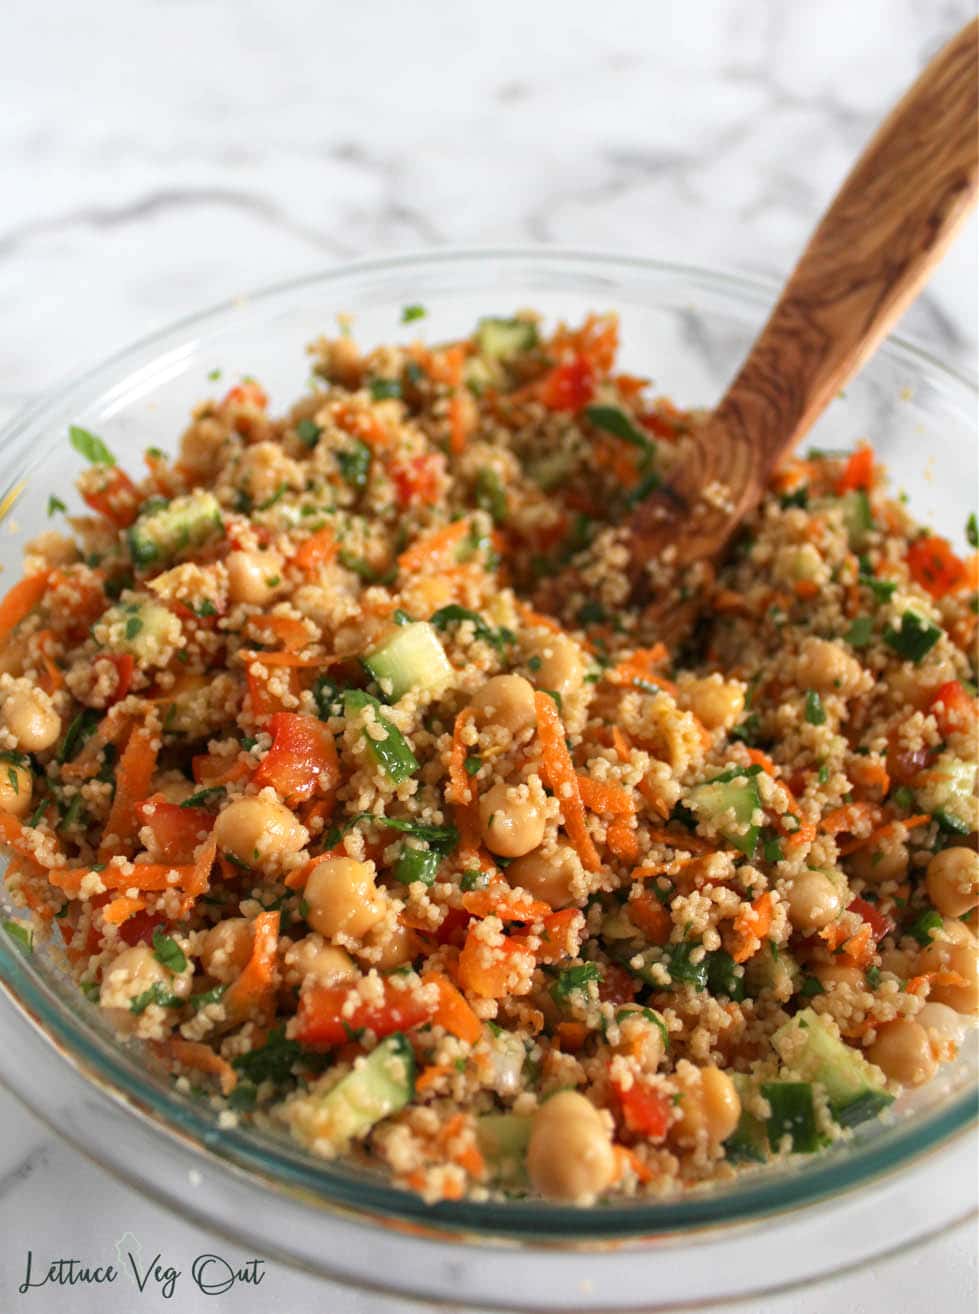 Vegan Mediterranean Salad Recipe With Couscous And Chickpeas